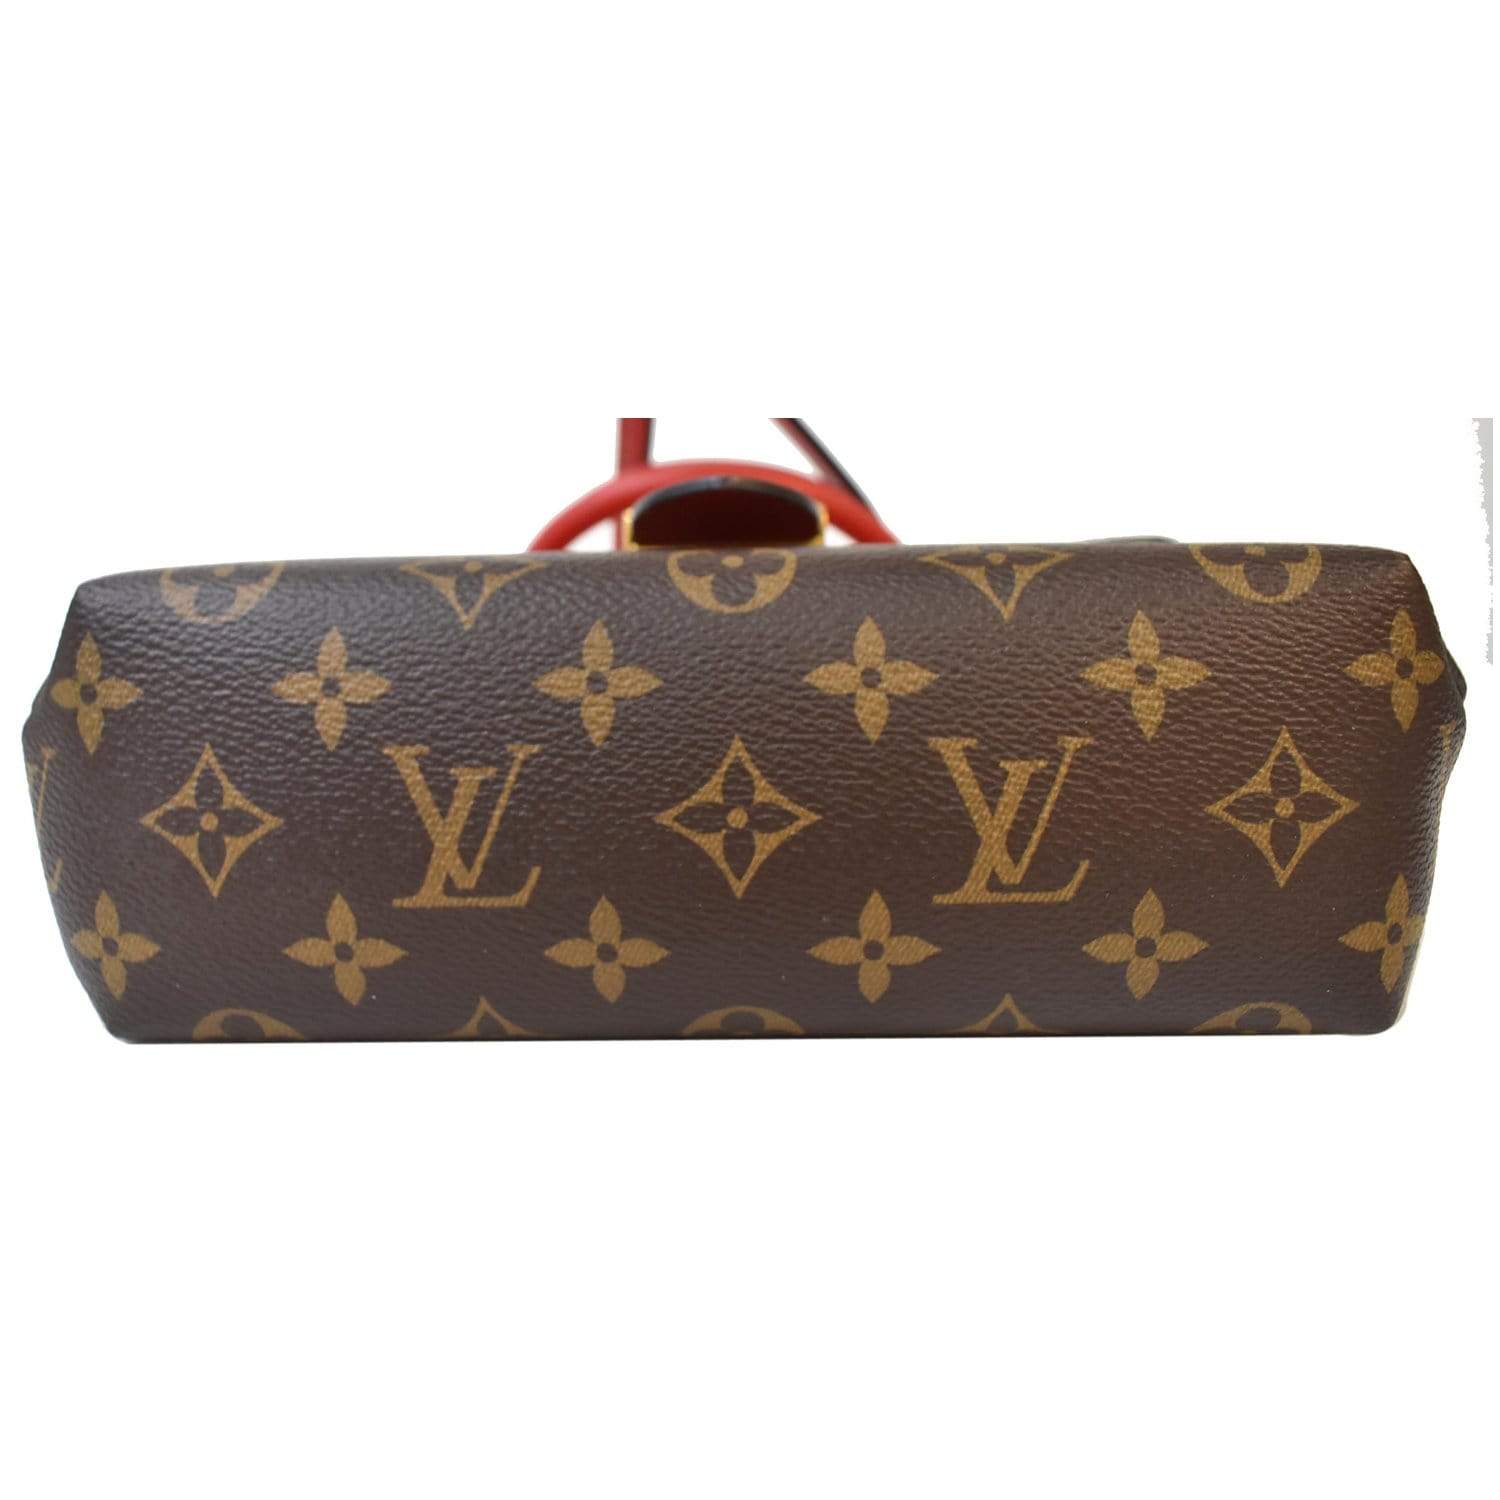 lv bag with red strap